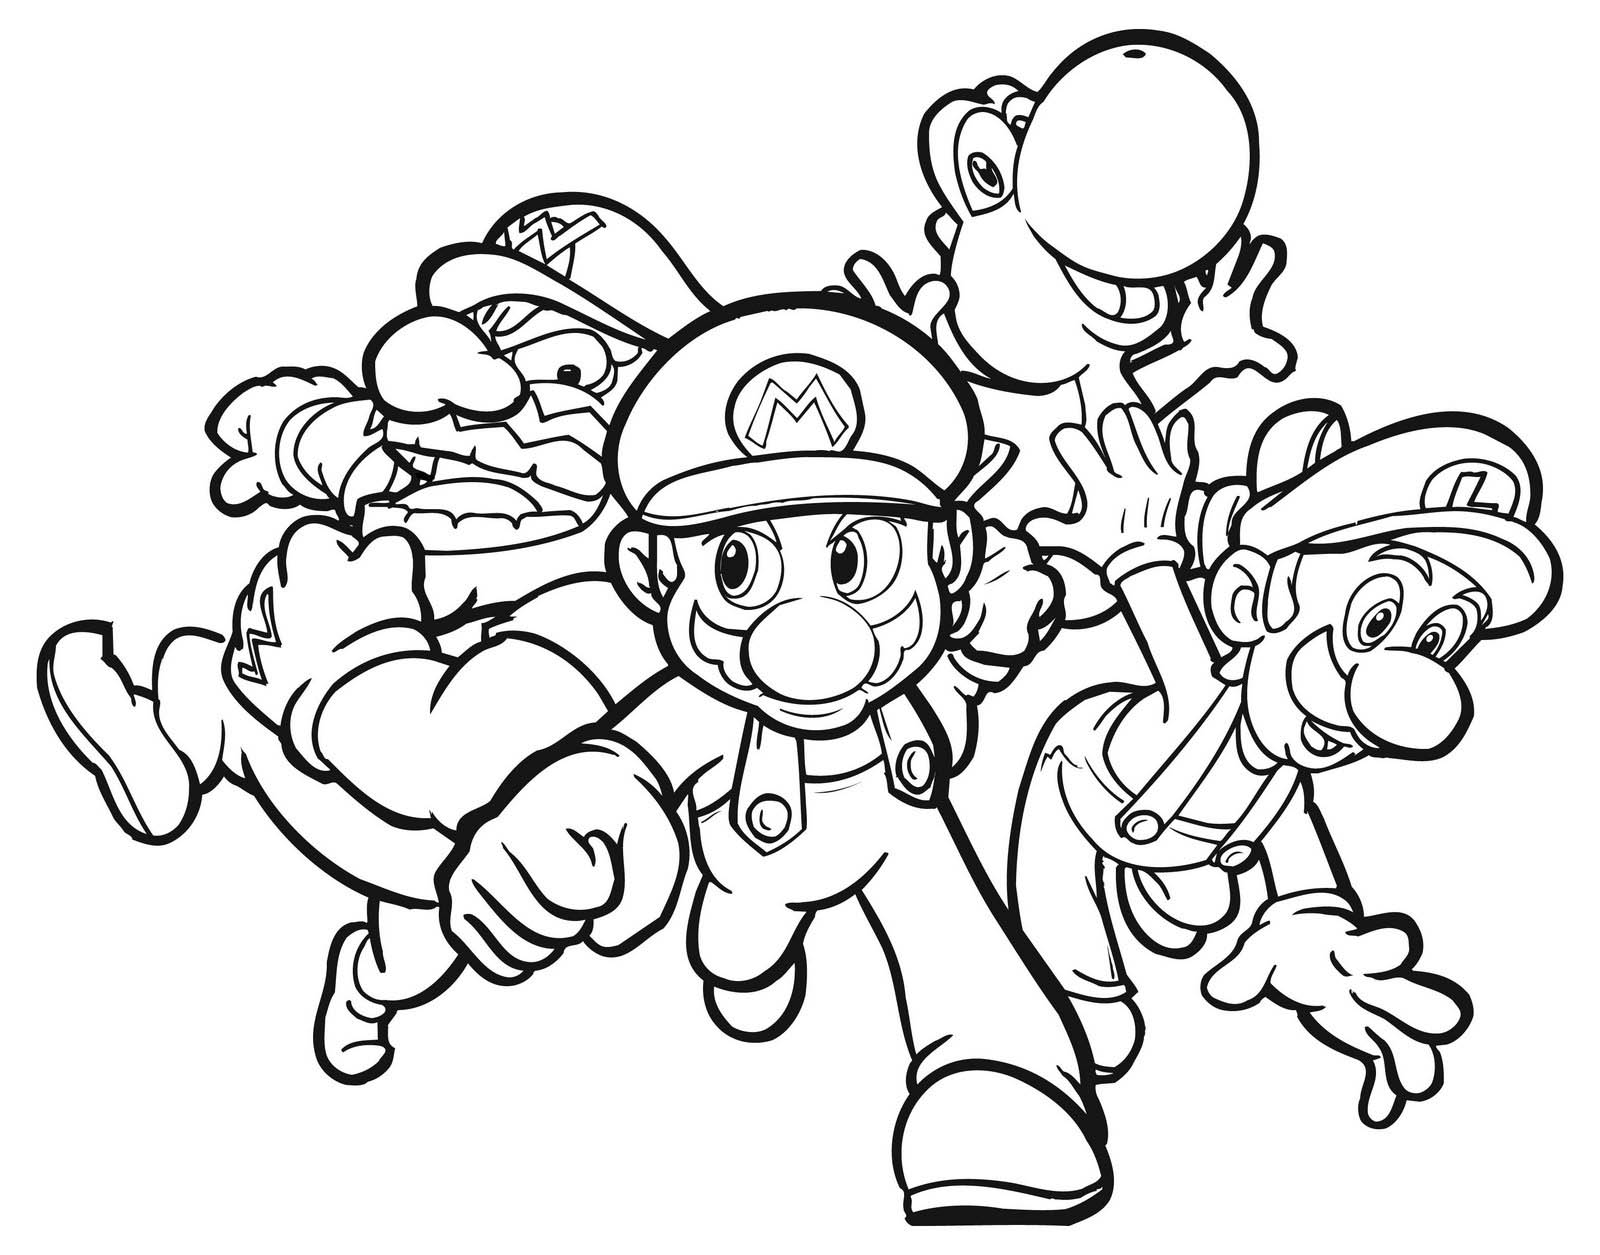 super mario world coloring pages